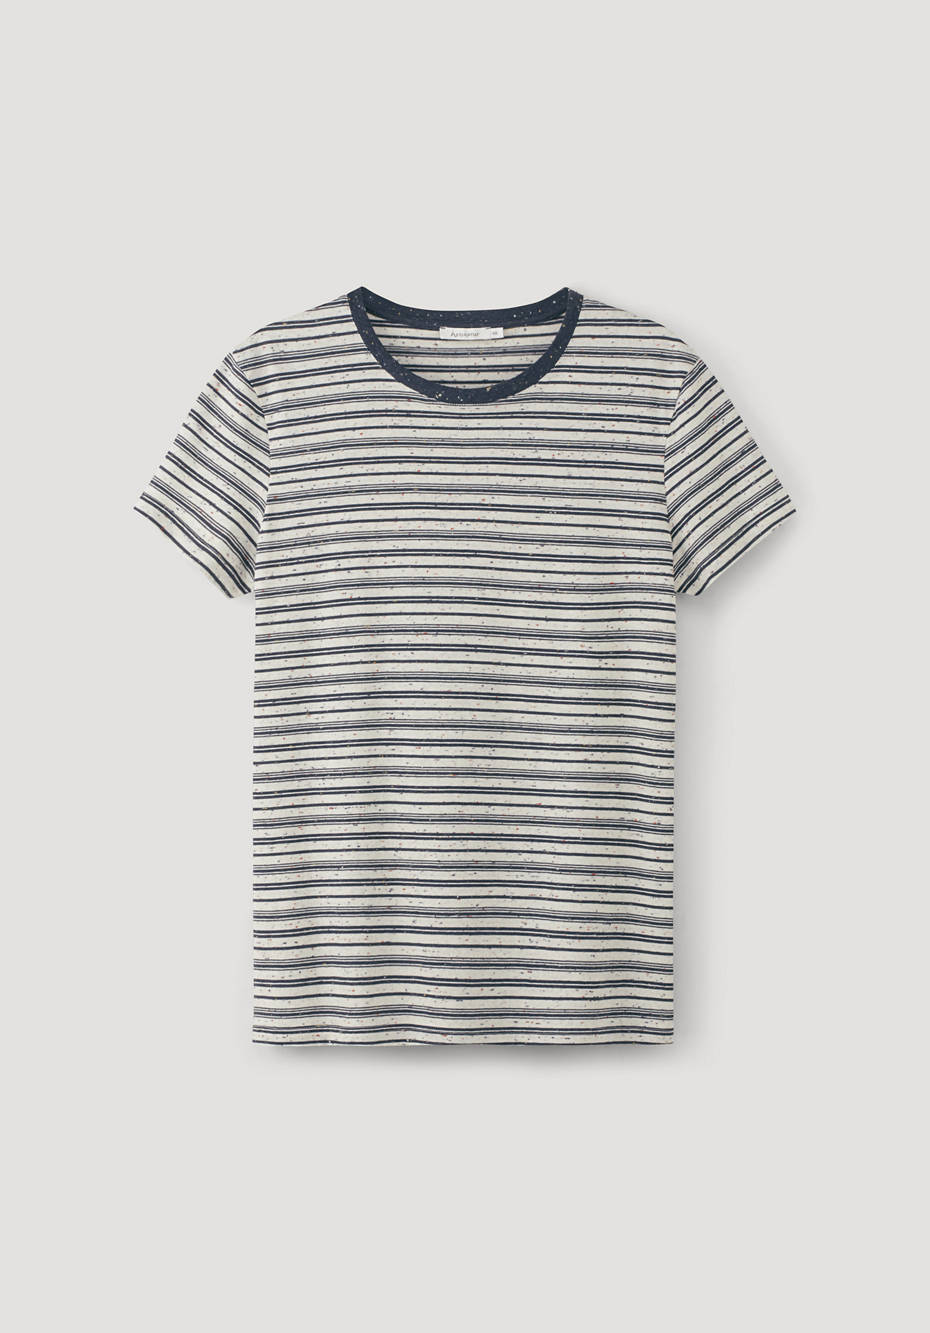 T-shirt made from pure organic cotton